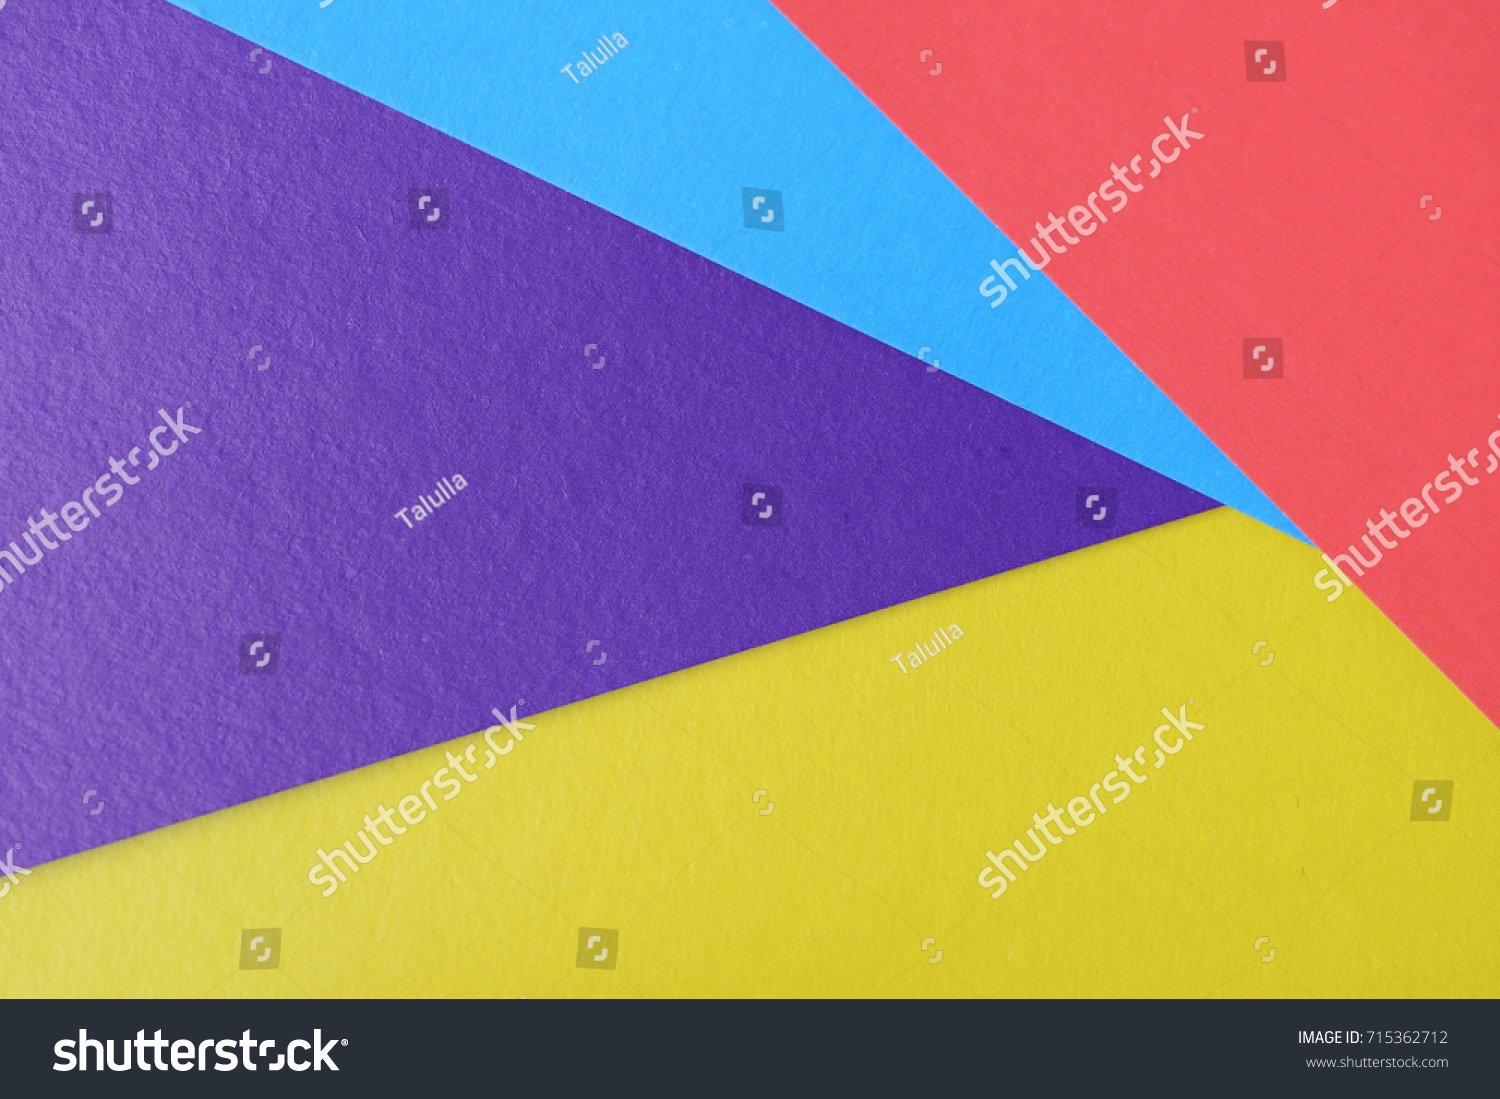 Multicolor background from a cardboard of different colors #715362712